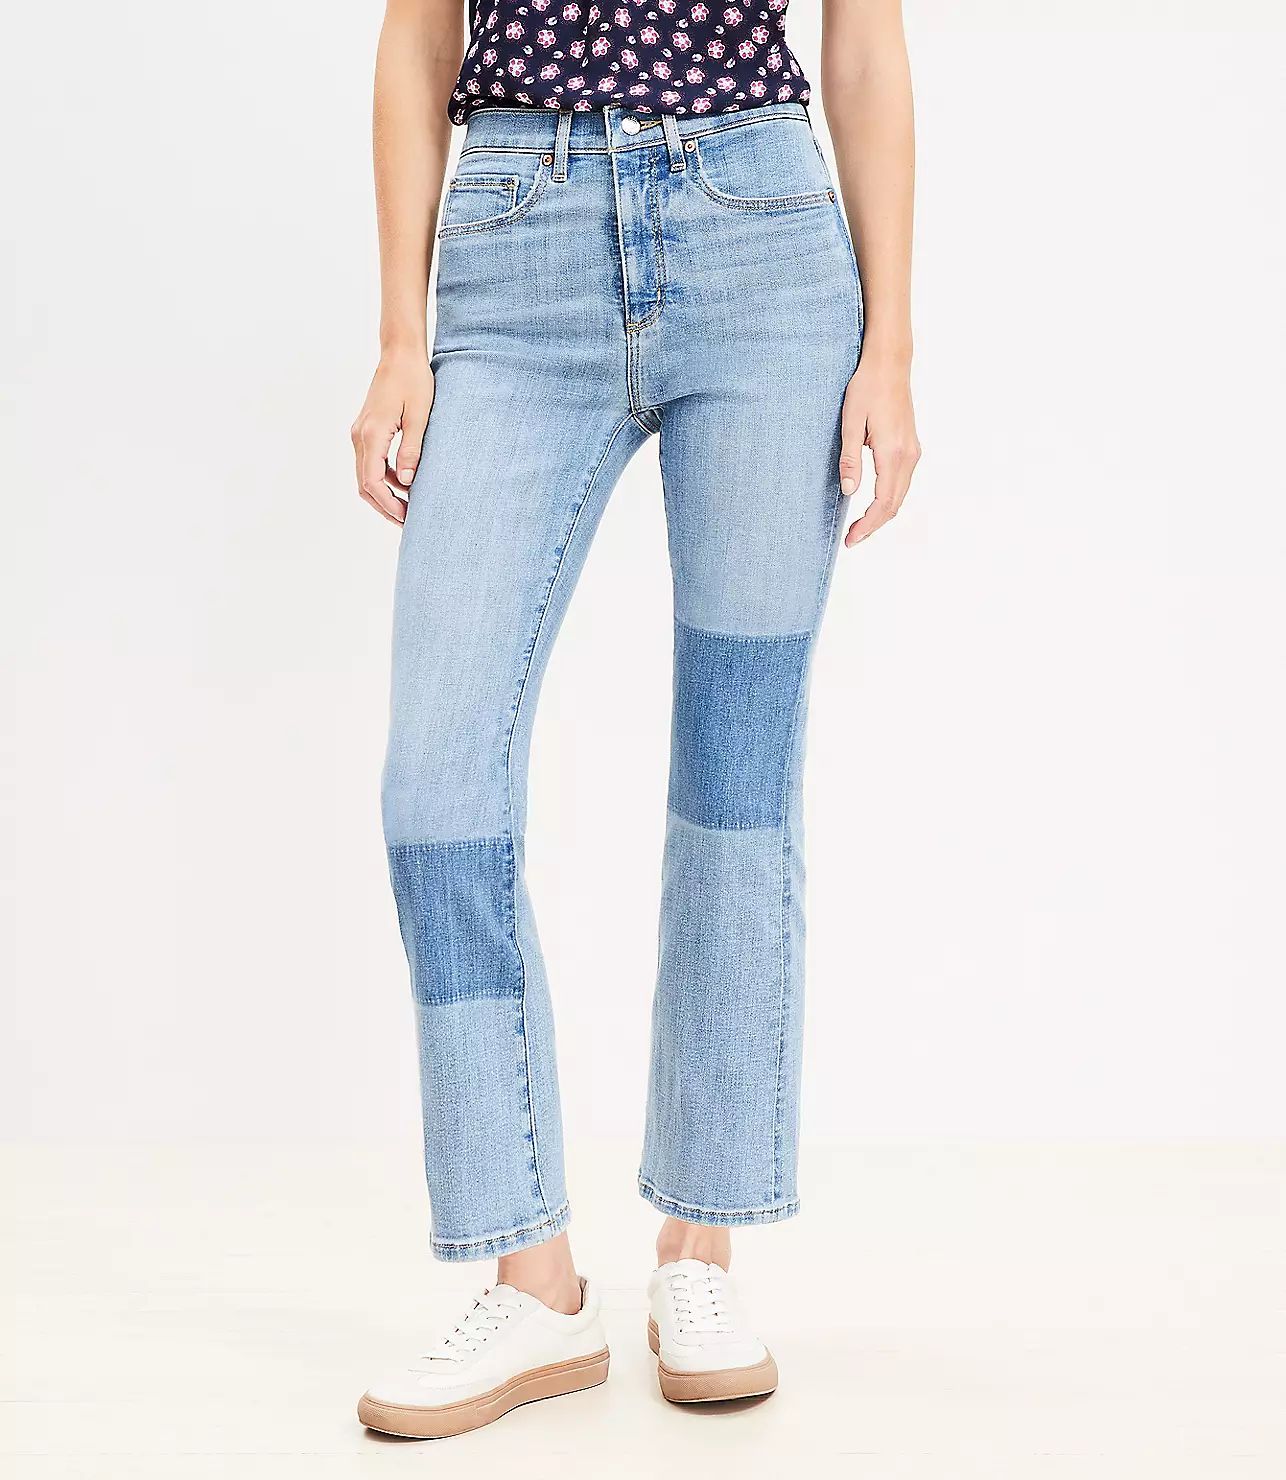 Petite High Rise Kick Crop Jeans in Destructed Mid Stone Wash | LOFT